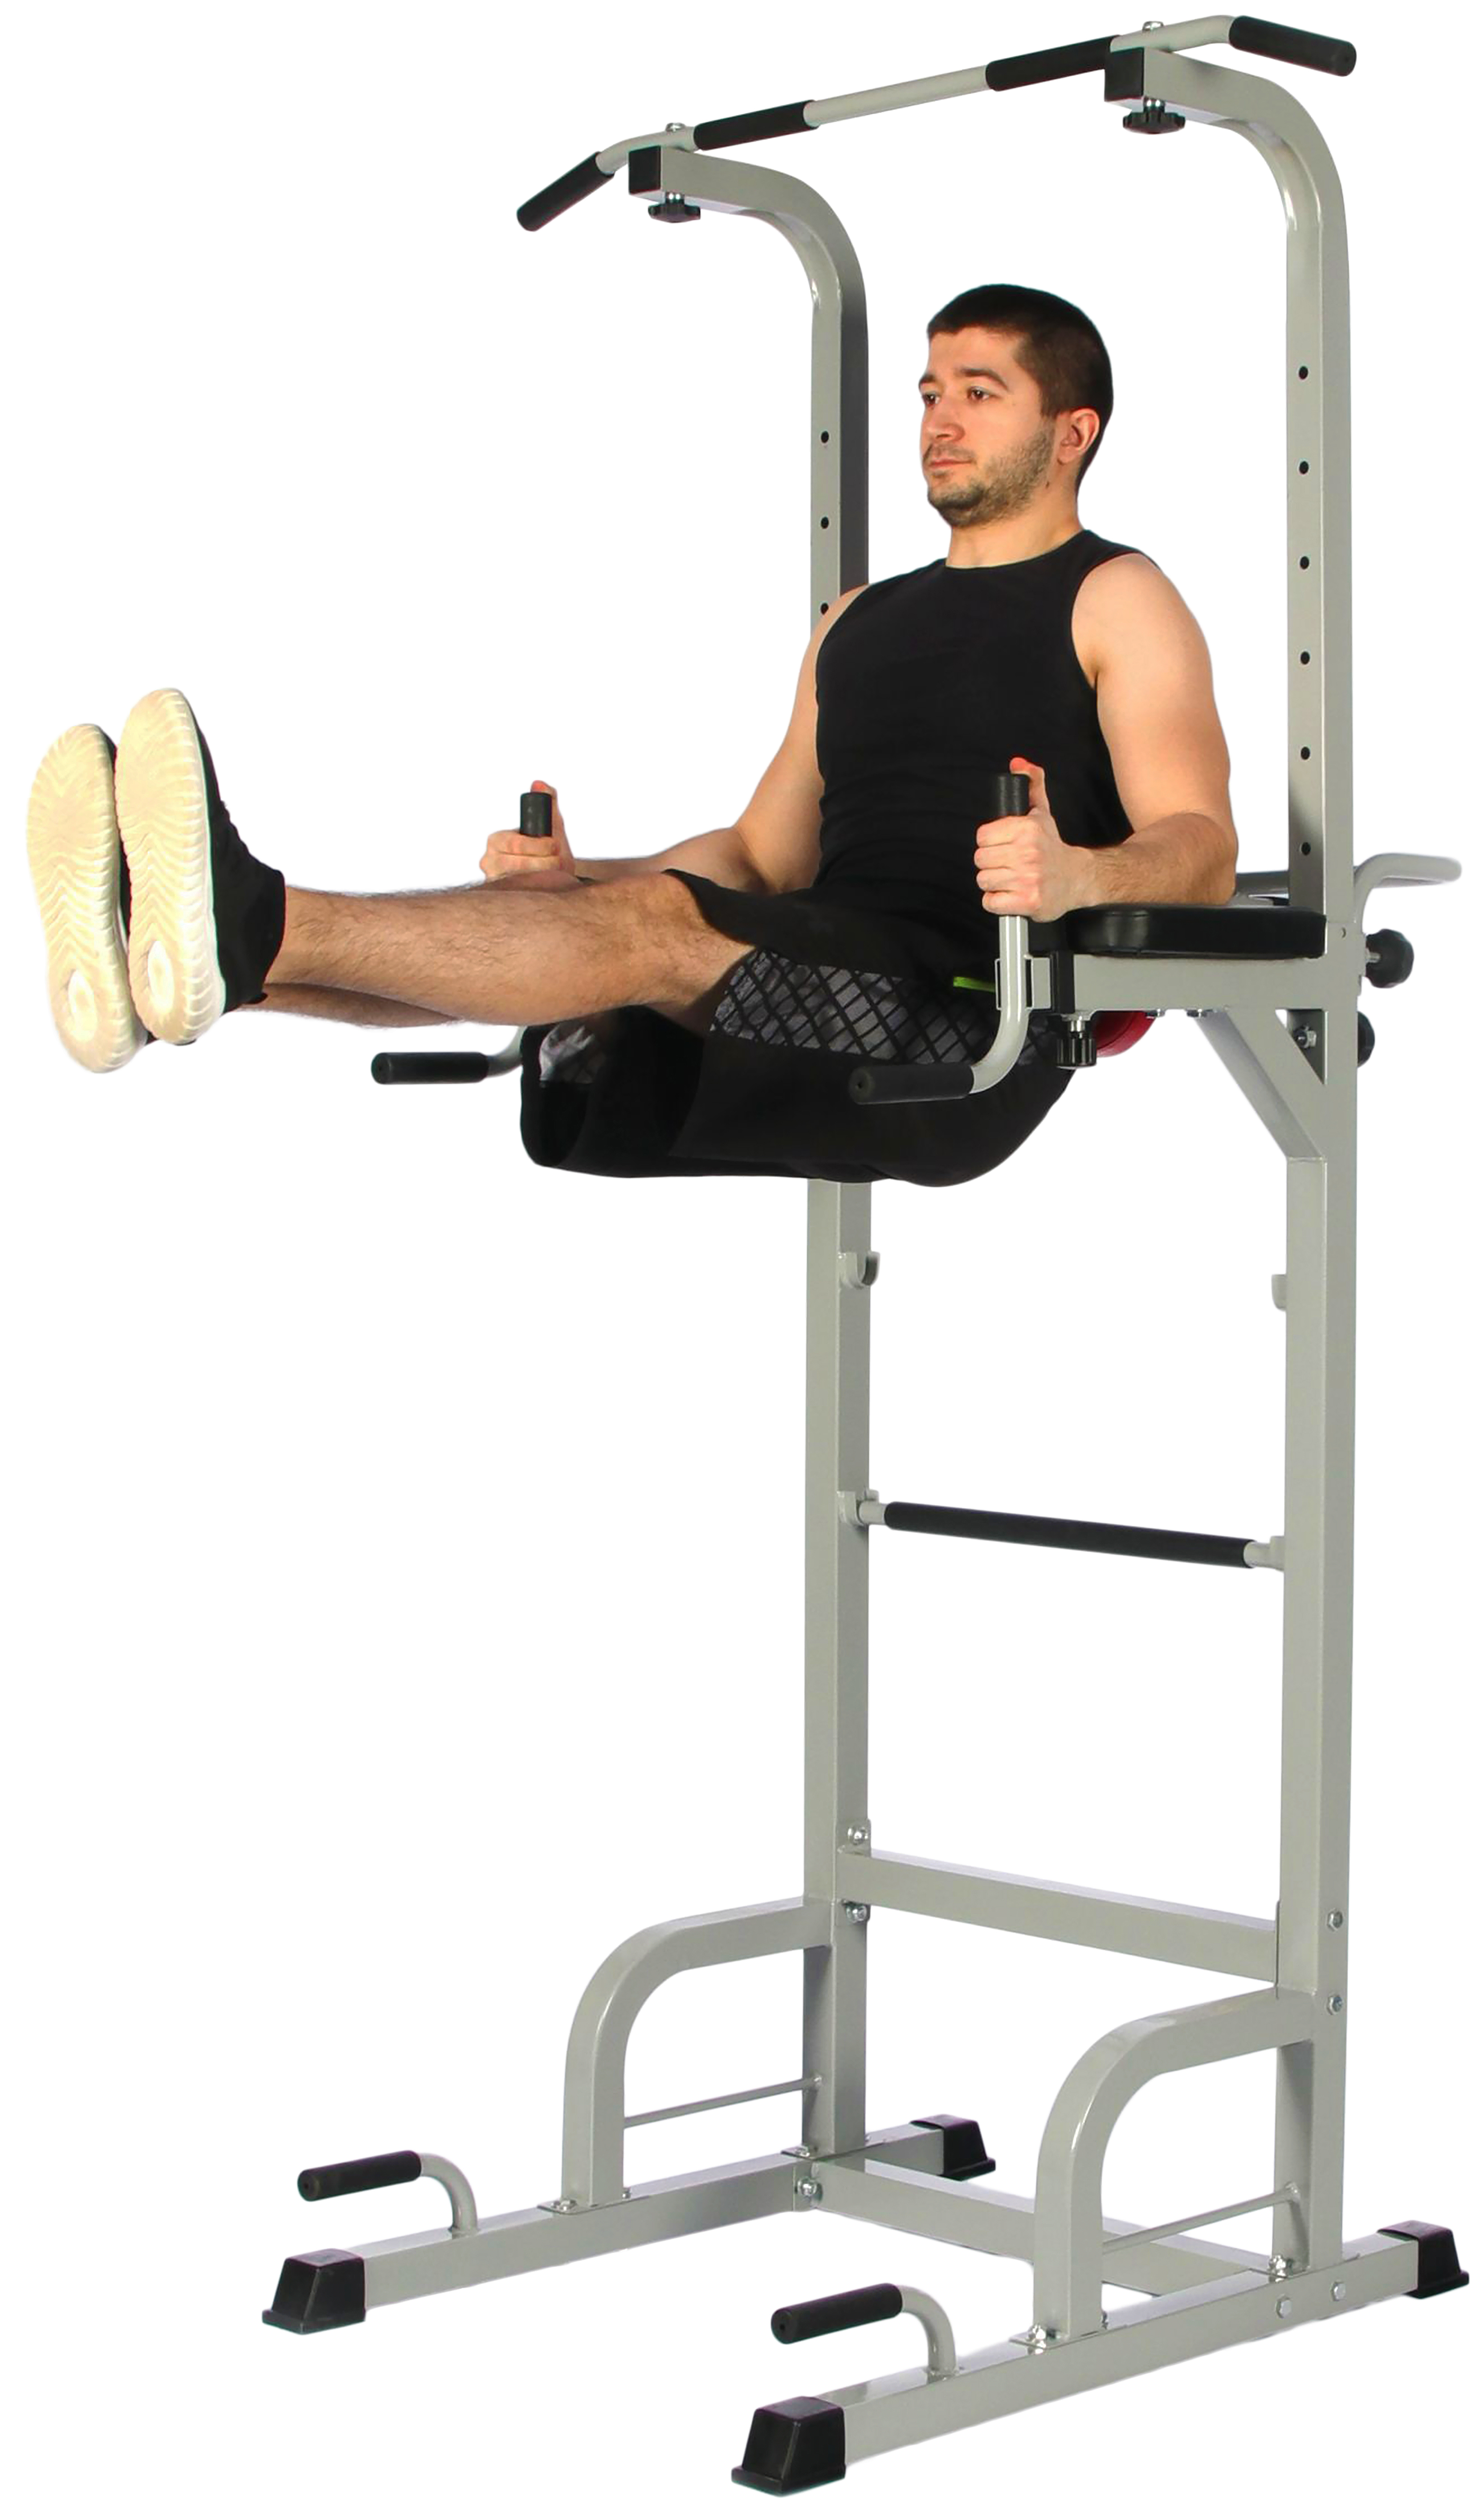 Everyday Essentials Power Tower with Push-up, Pull-up and Workout Dip Station for Home Gym Strength Training - image 3 of 6